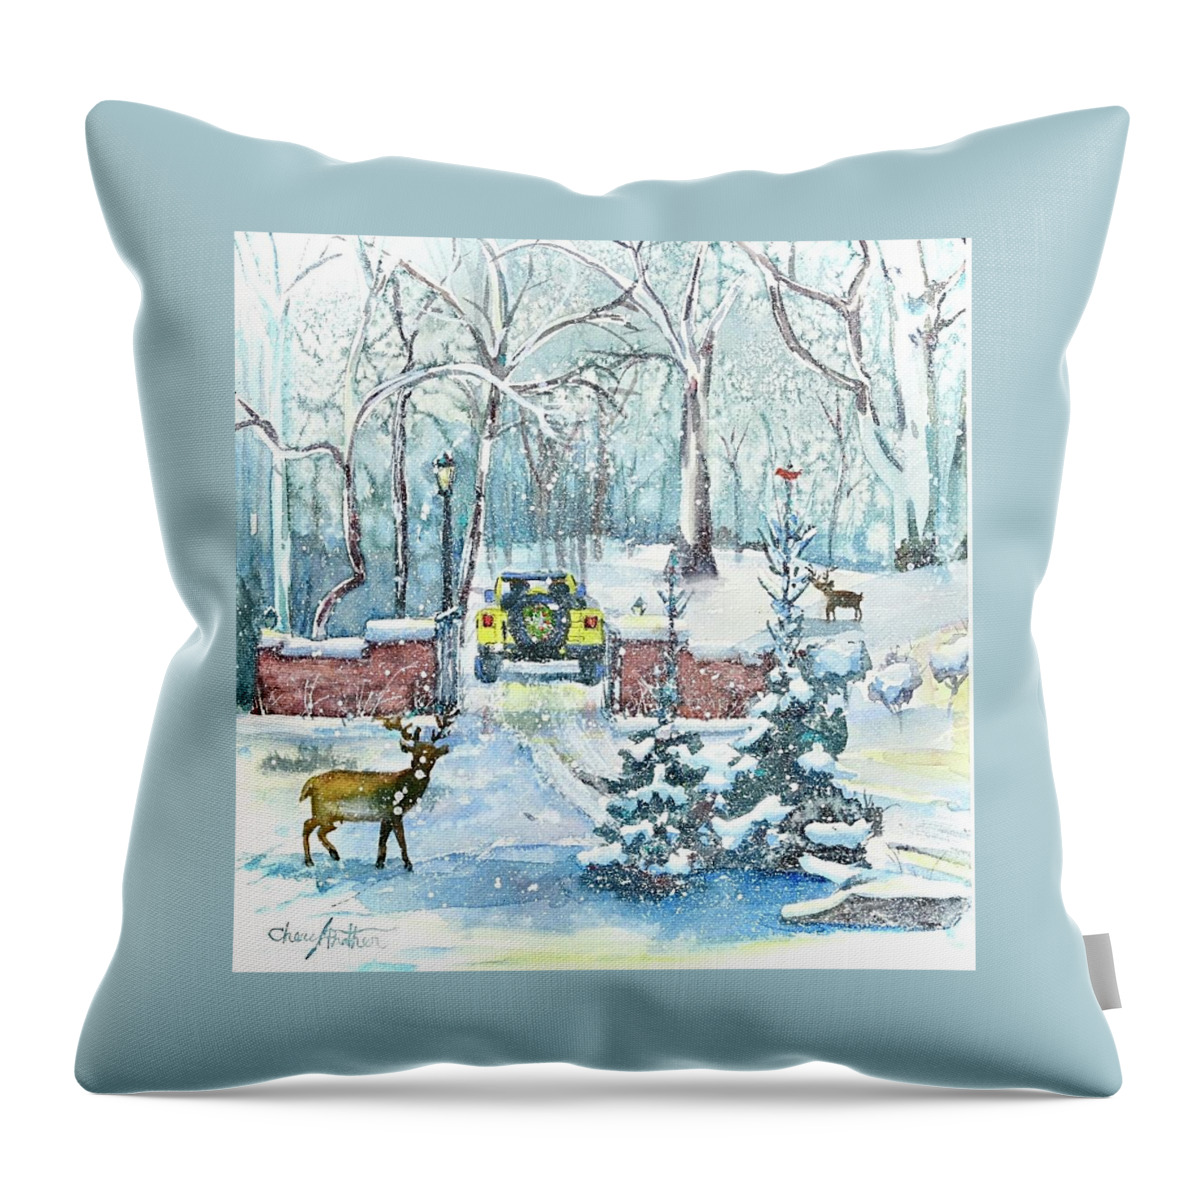 Christmas Throw Pillow featuring the painting Over the River And Through The Woods by Cheryl Prather